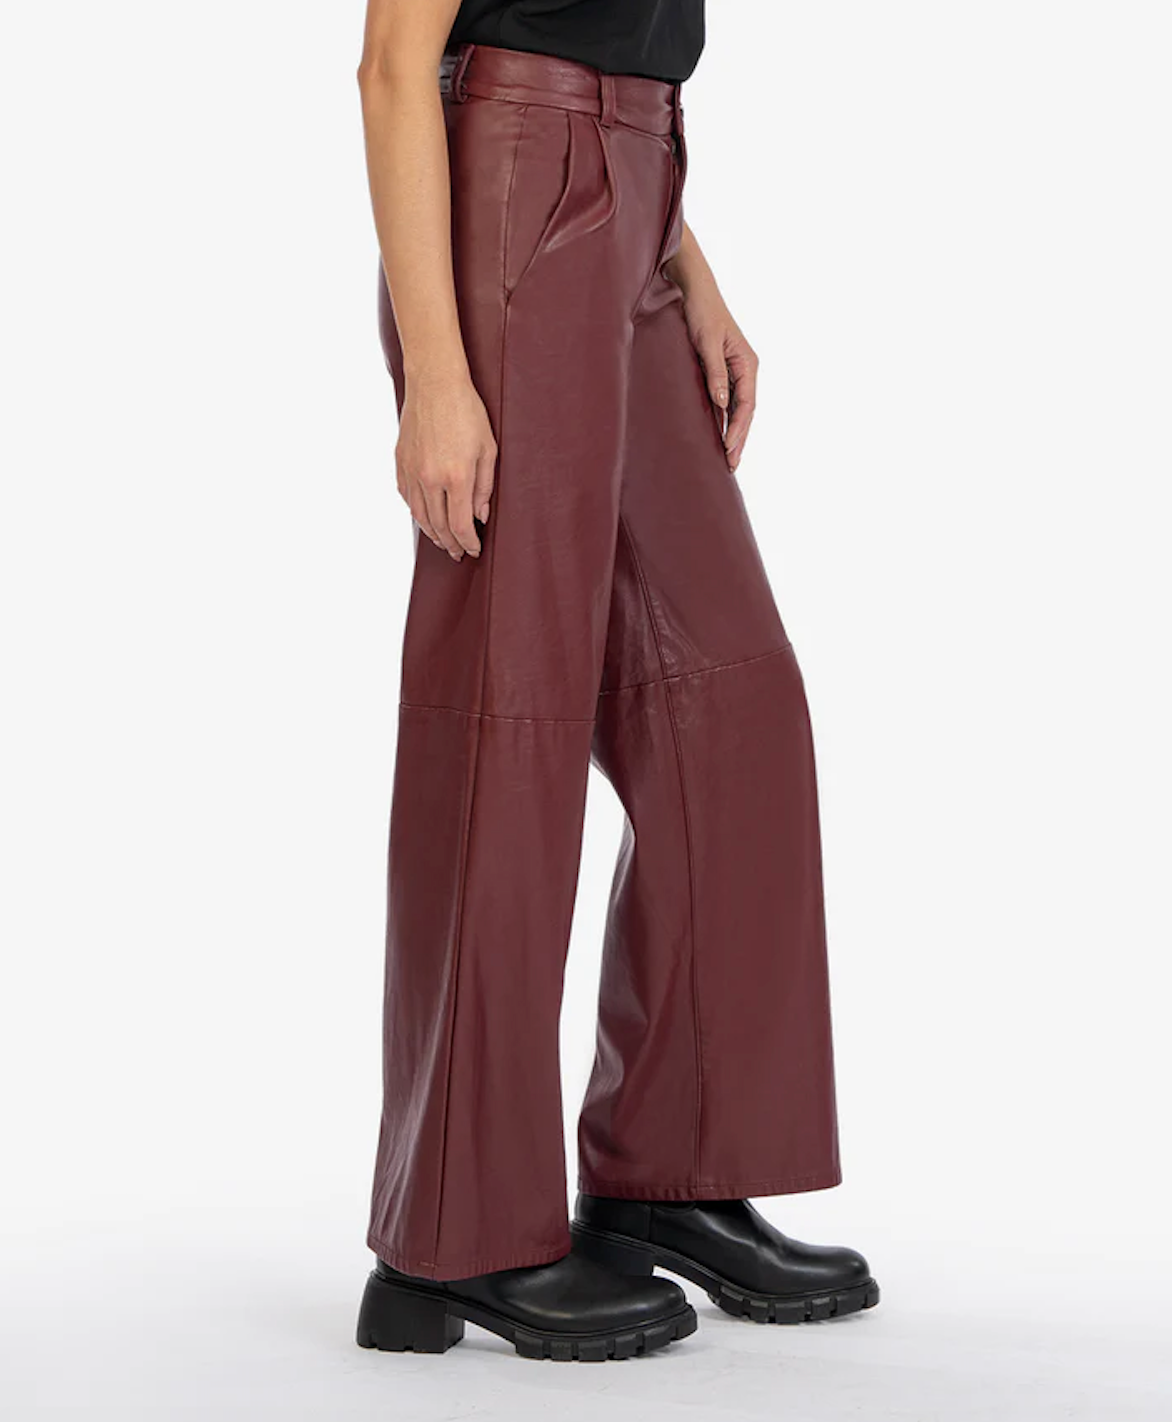 KUT FROM THE KLOTH JEAN HIGH RISE WIDE LEG COATED TROUSER IN BORDEAUX